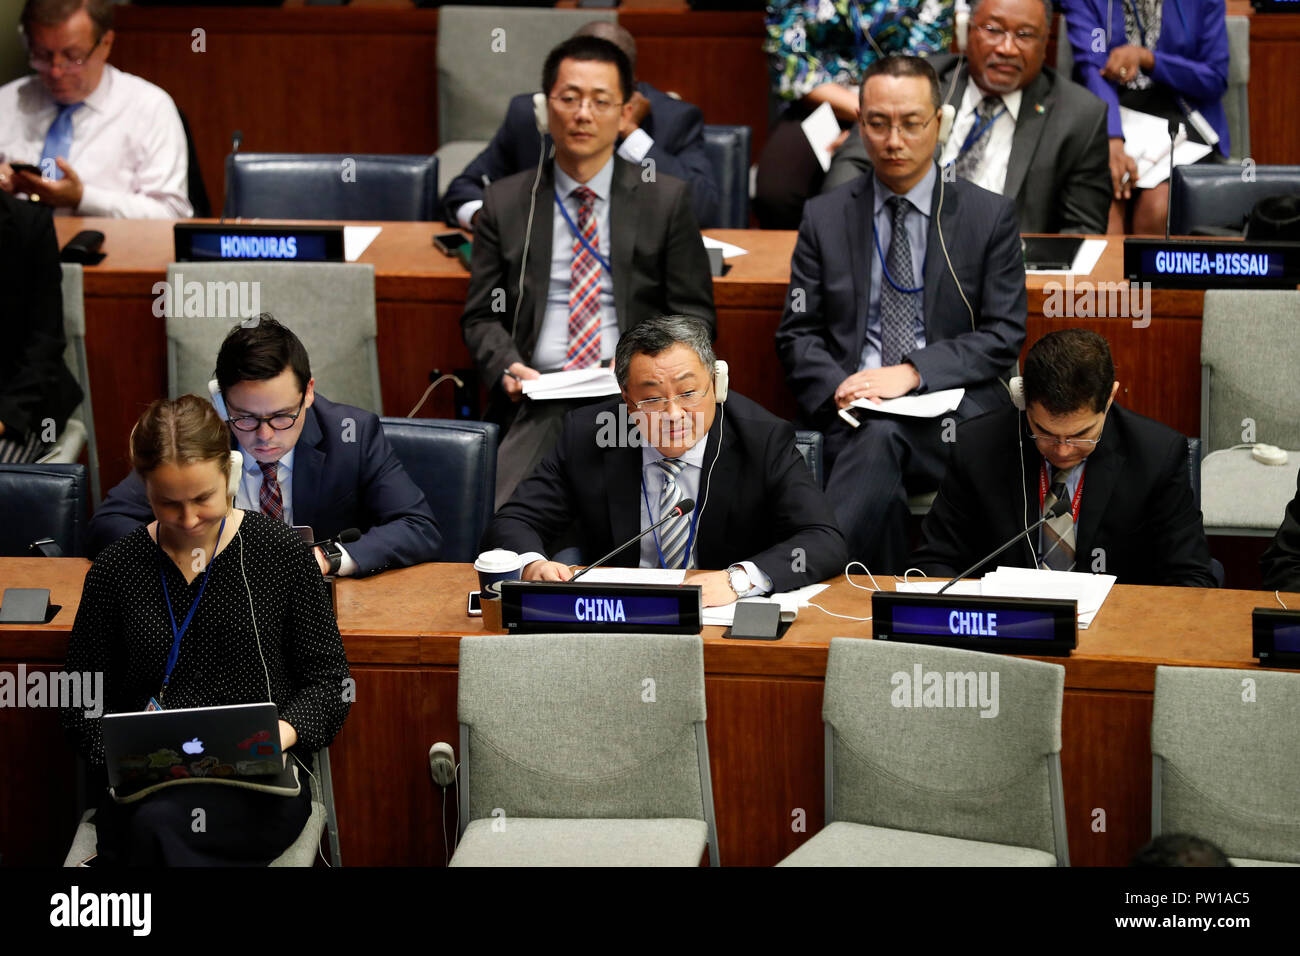 United Nations, Department of Arms Control of the Chinese Foreign Ministry. 11th Oct, 2018. Fu Cong, head of the Department of Arms Control of the Chinese Foreign Ministry, addresses a plenary meeting of the First Committee of the UN General Assembly at the UN headquarters in New York Oct. 11, 2018. Fu Cong on Thursday called for upholding multilateralism and following international rules and norms for universal security. Credit: Li Muzi/Xinhua/Alamy Live News Stock Photo